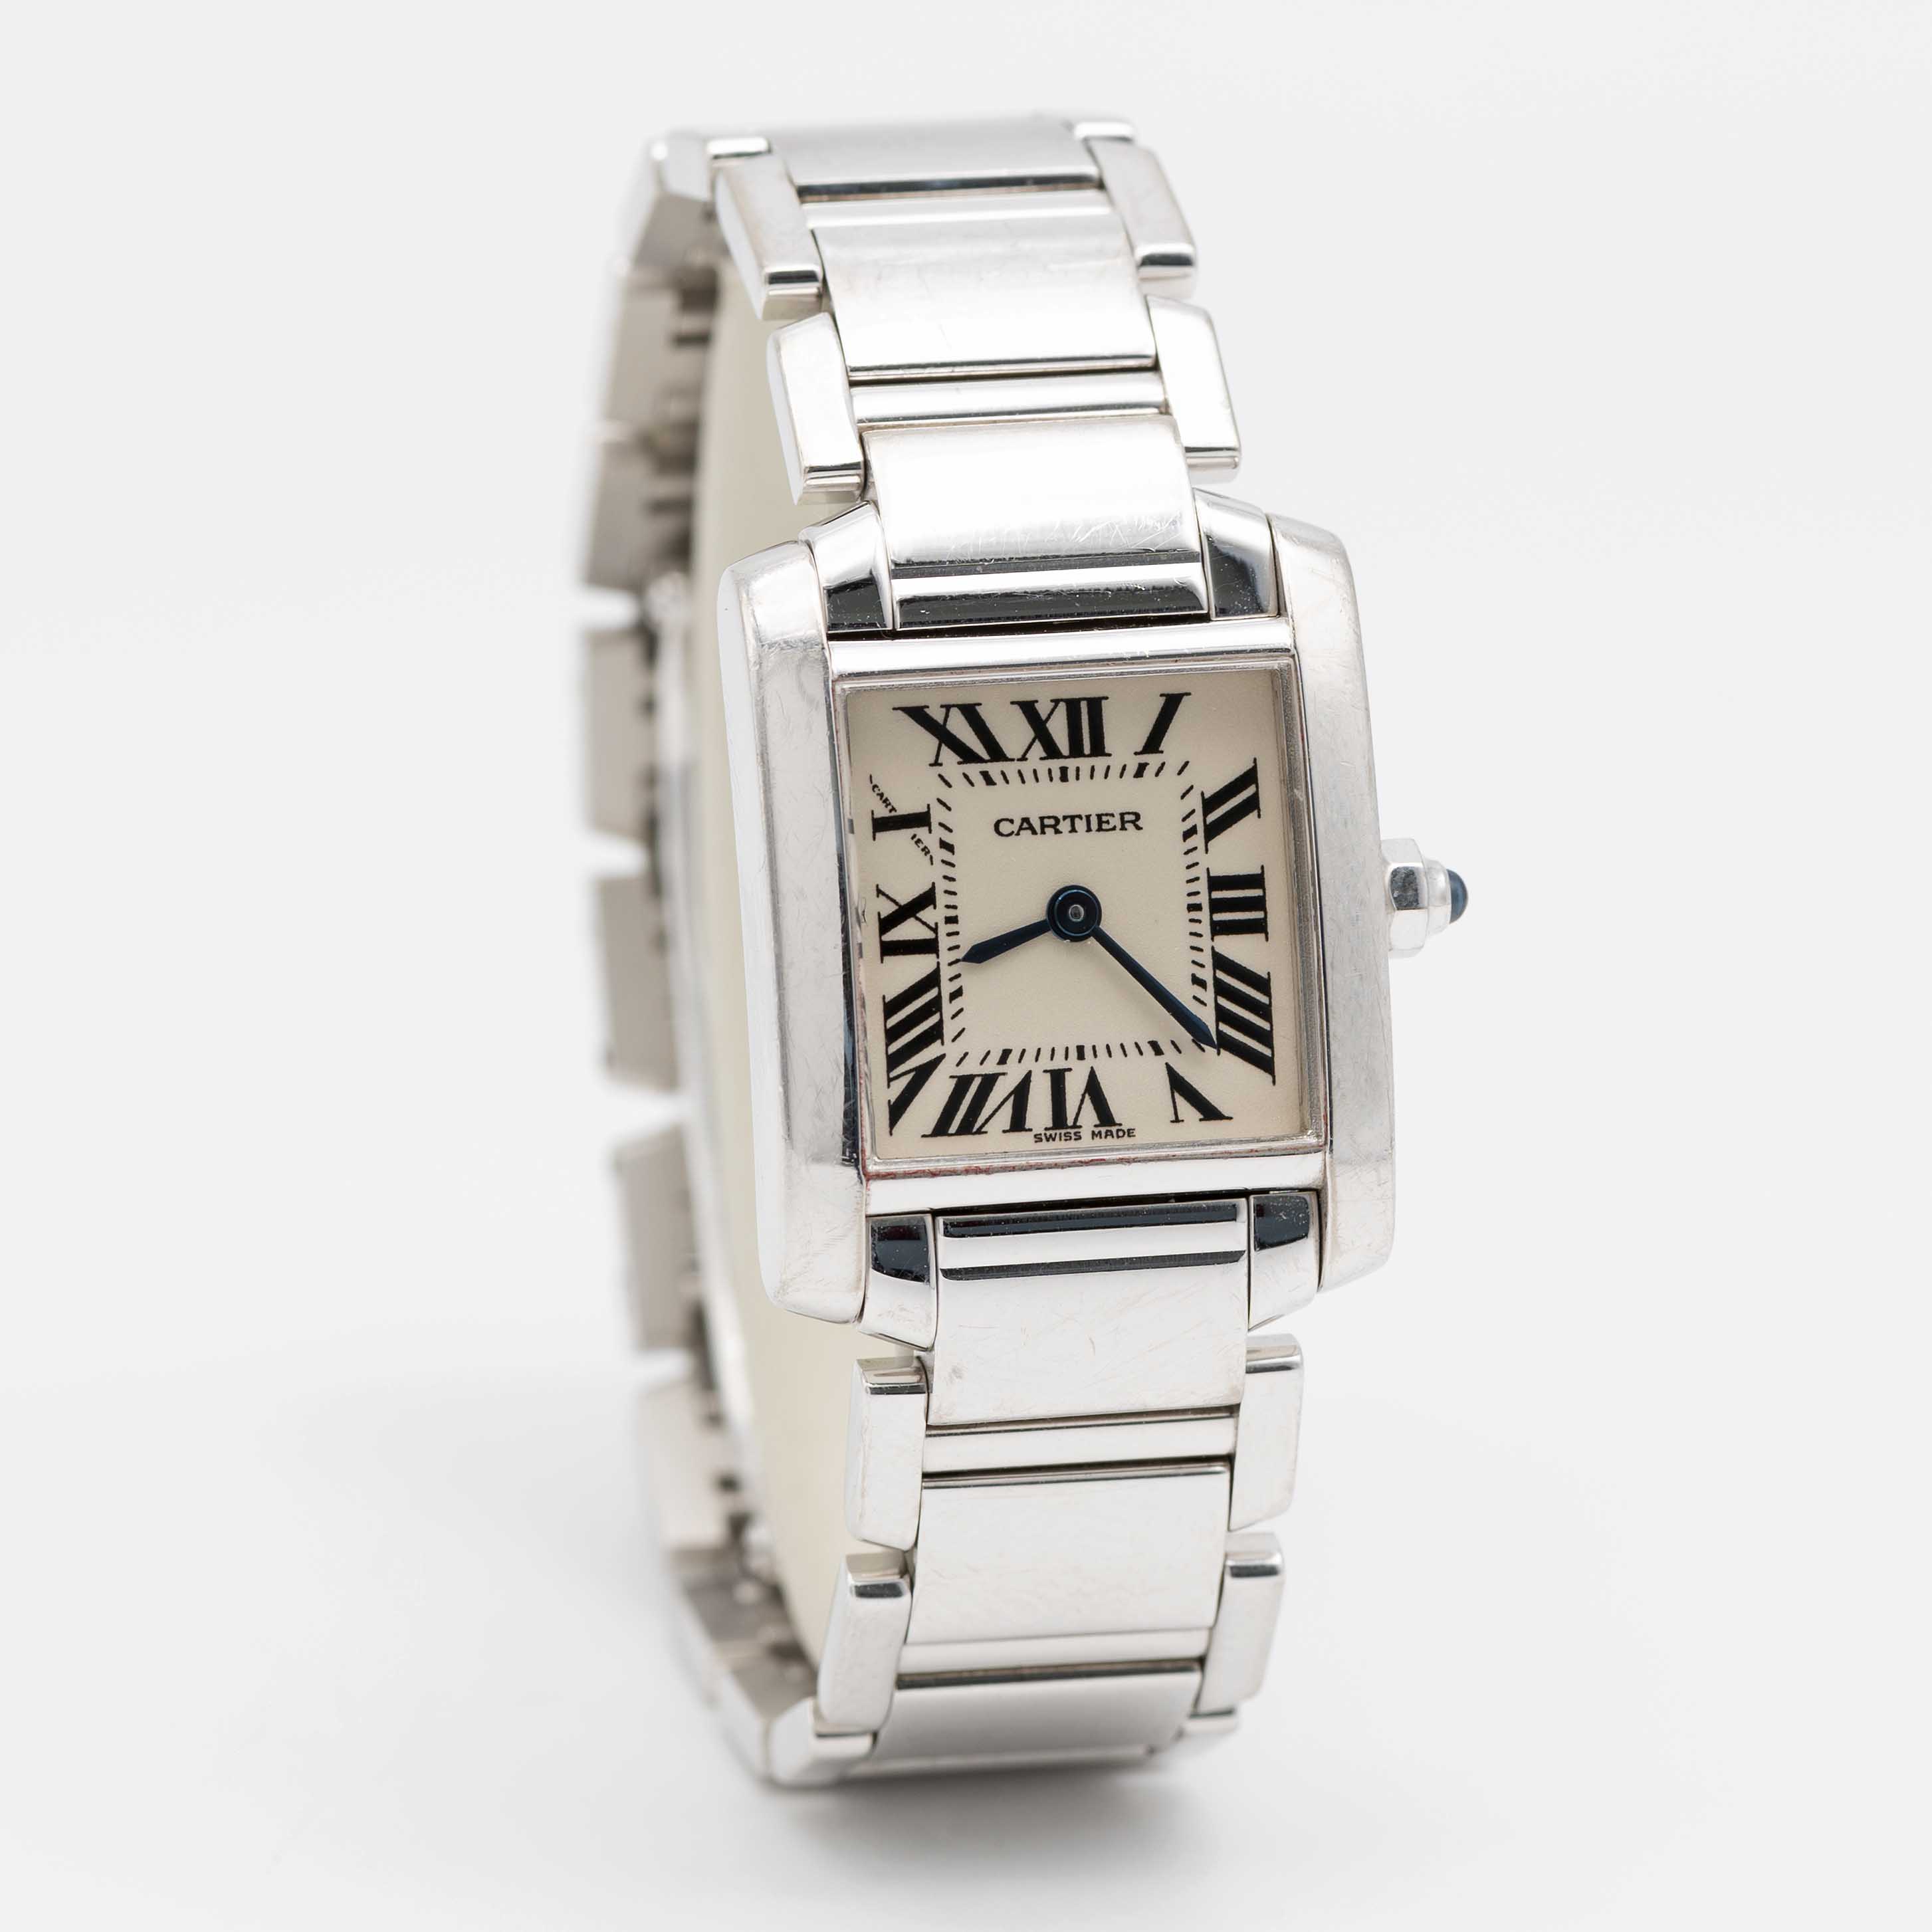 A LADIES 18K SOLID WHITE GOLD CARTIER TANK FRANCAISE BRACELET WATCH CIRCA 2005, REF. 2403 - Image 4 of 9